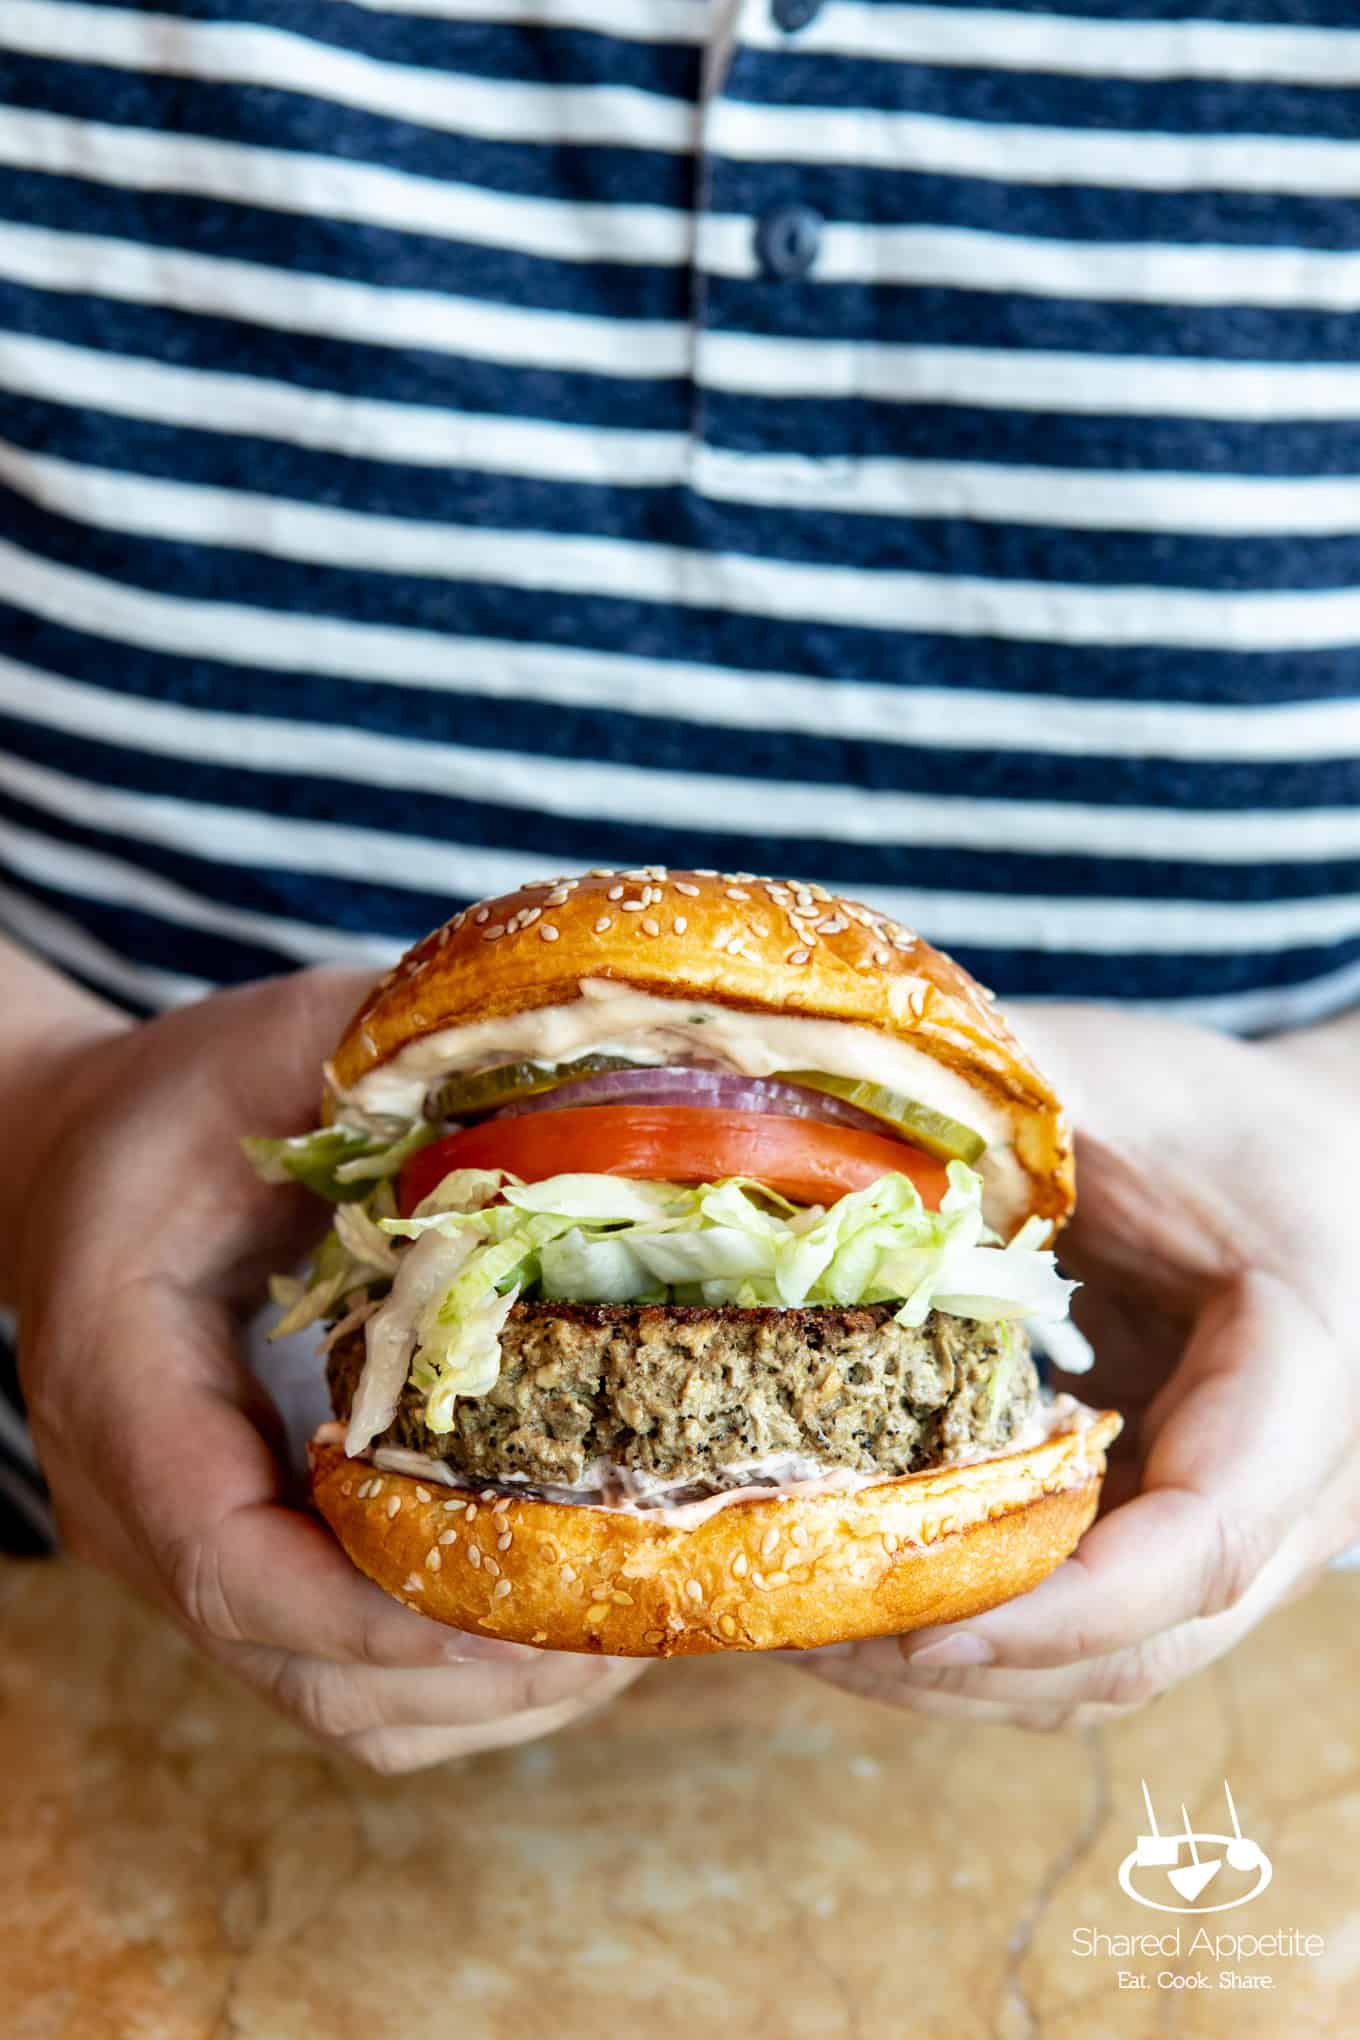 Impossible Burger at The Cheesecake Factory | sharedappetite.com